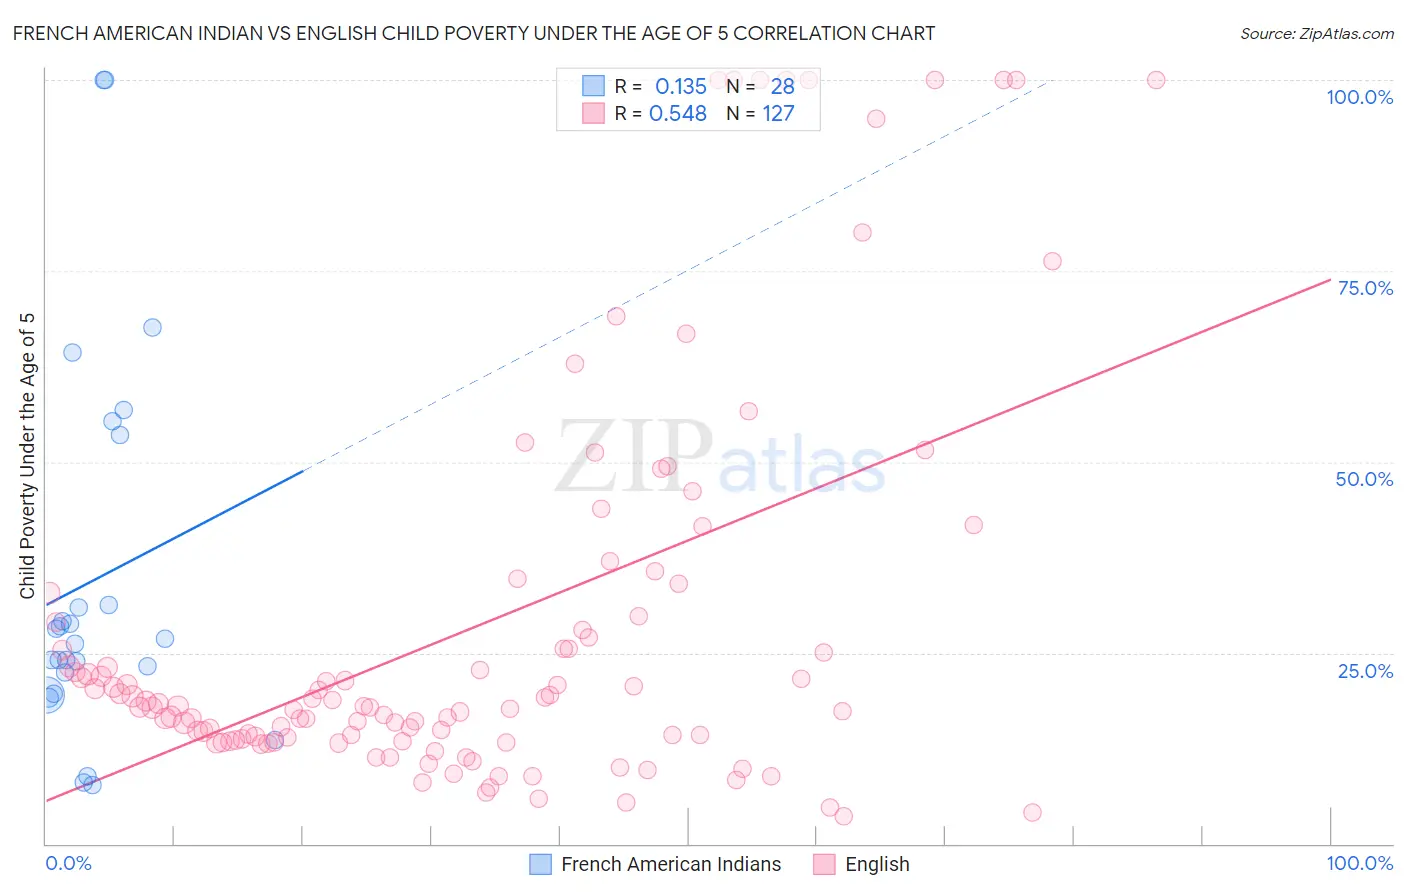 French American Indian vs English Child Poverty Under the Age of 5